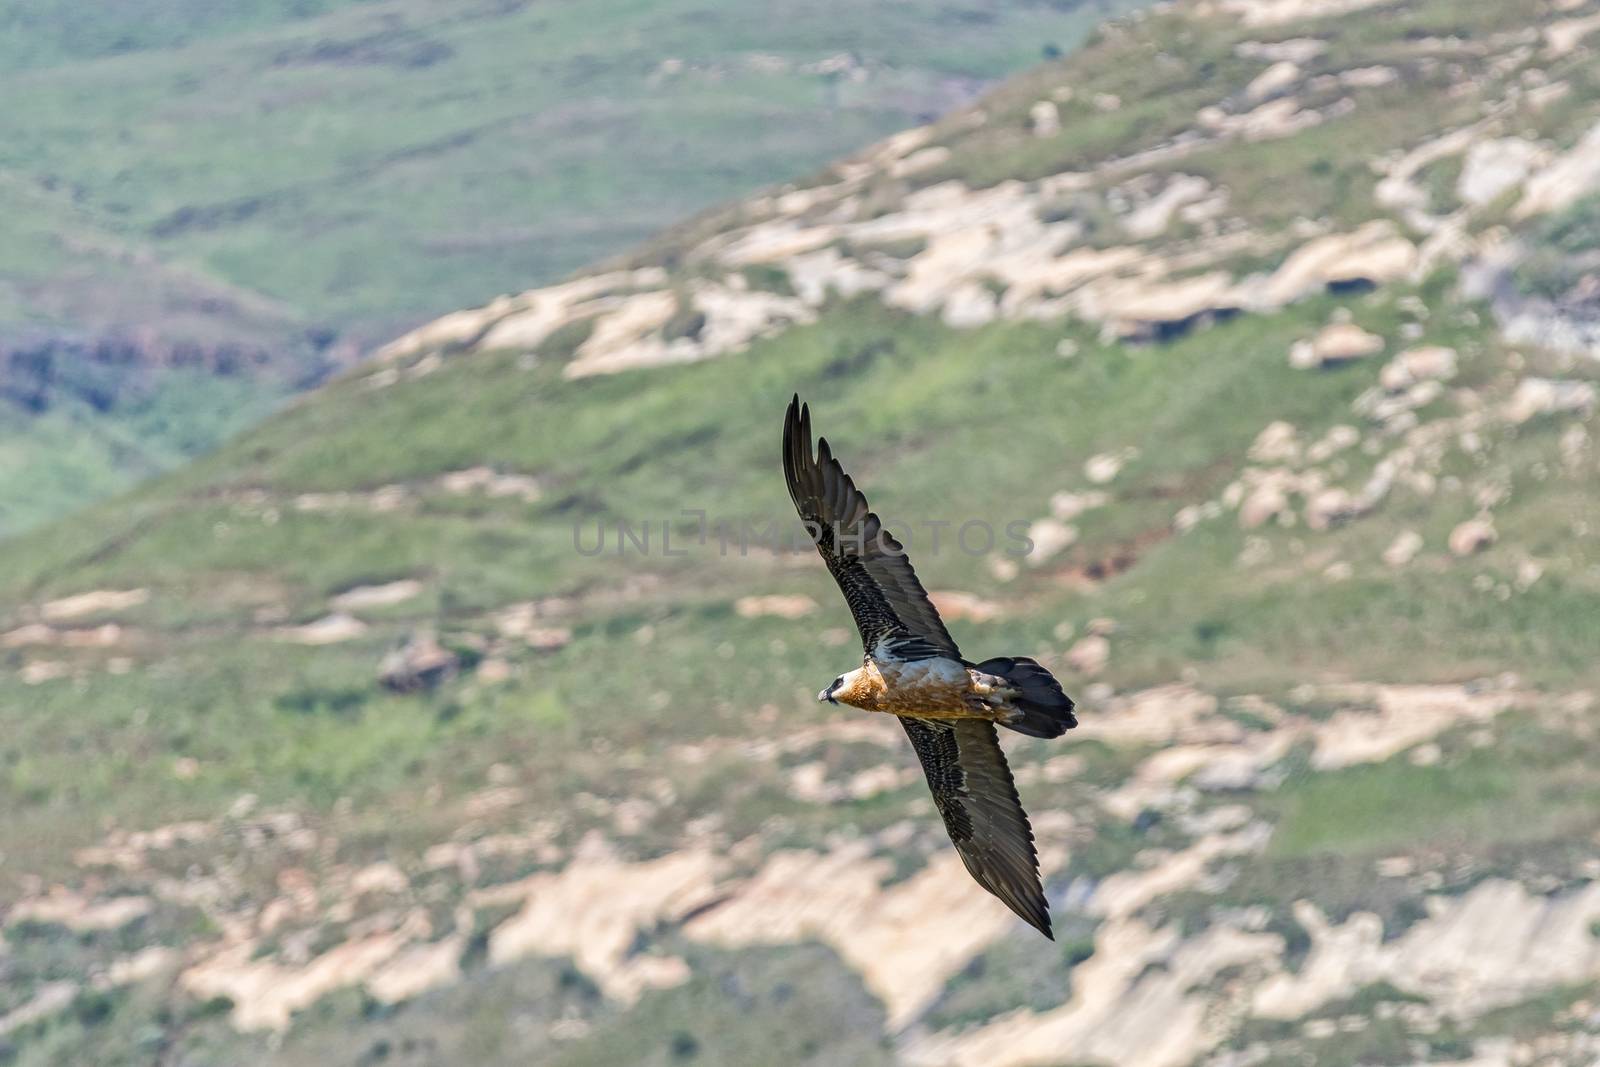 Bearded Vulture, Gypaetus barbatus, in flight at Golden Gate by dpreezg